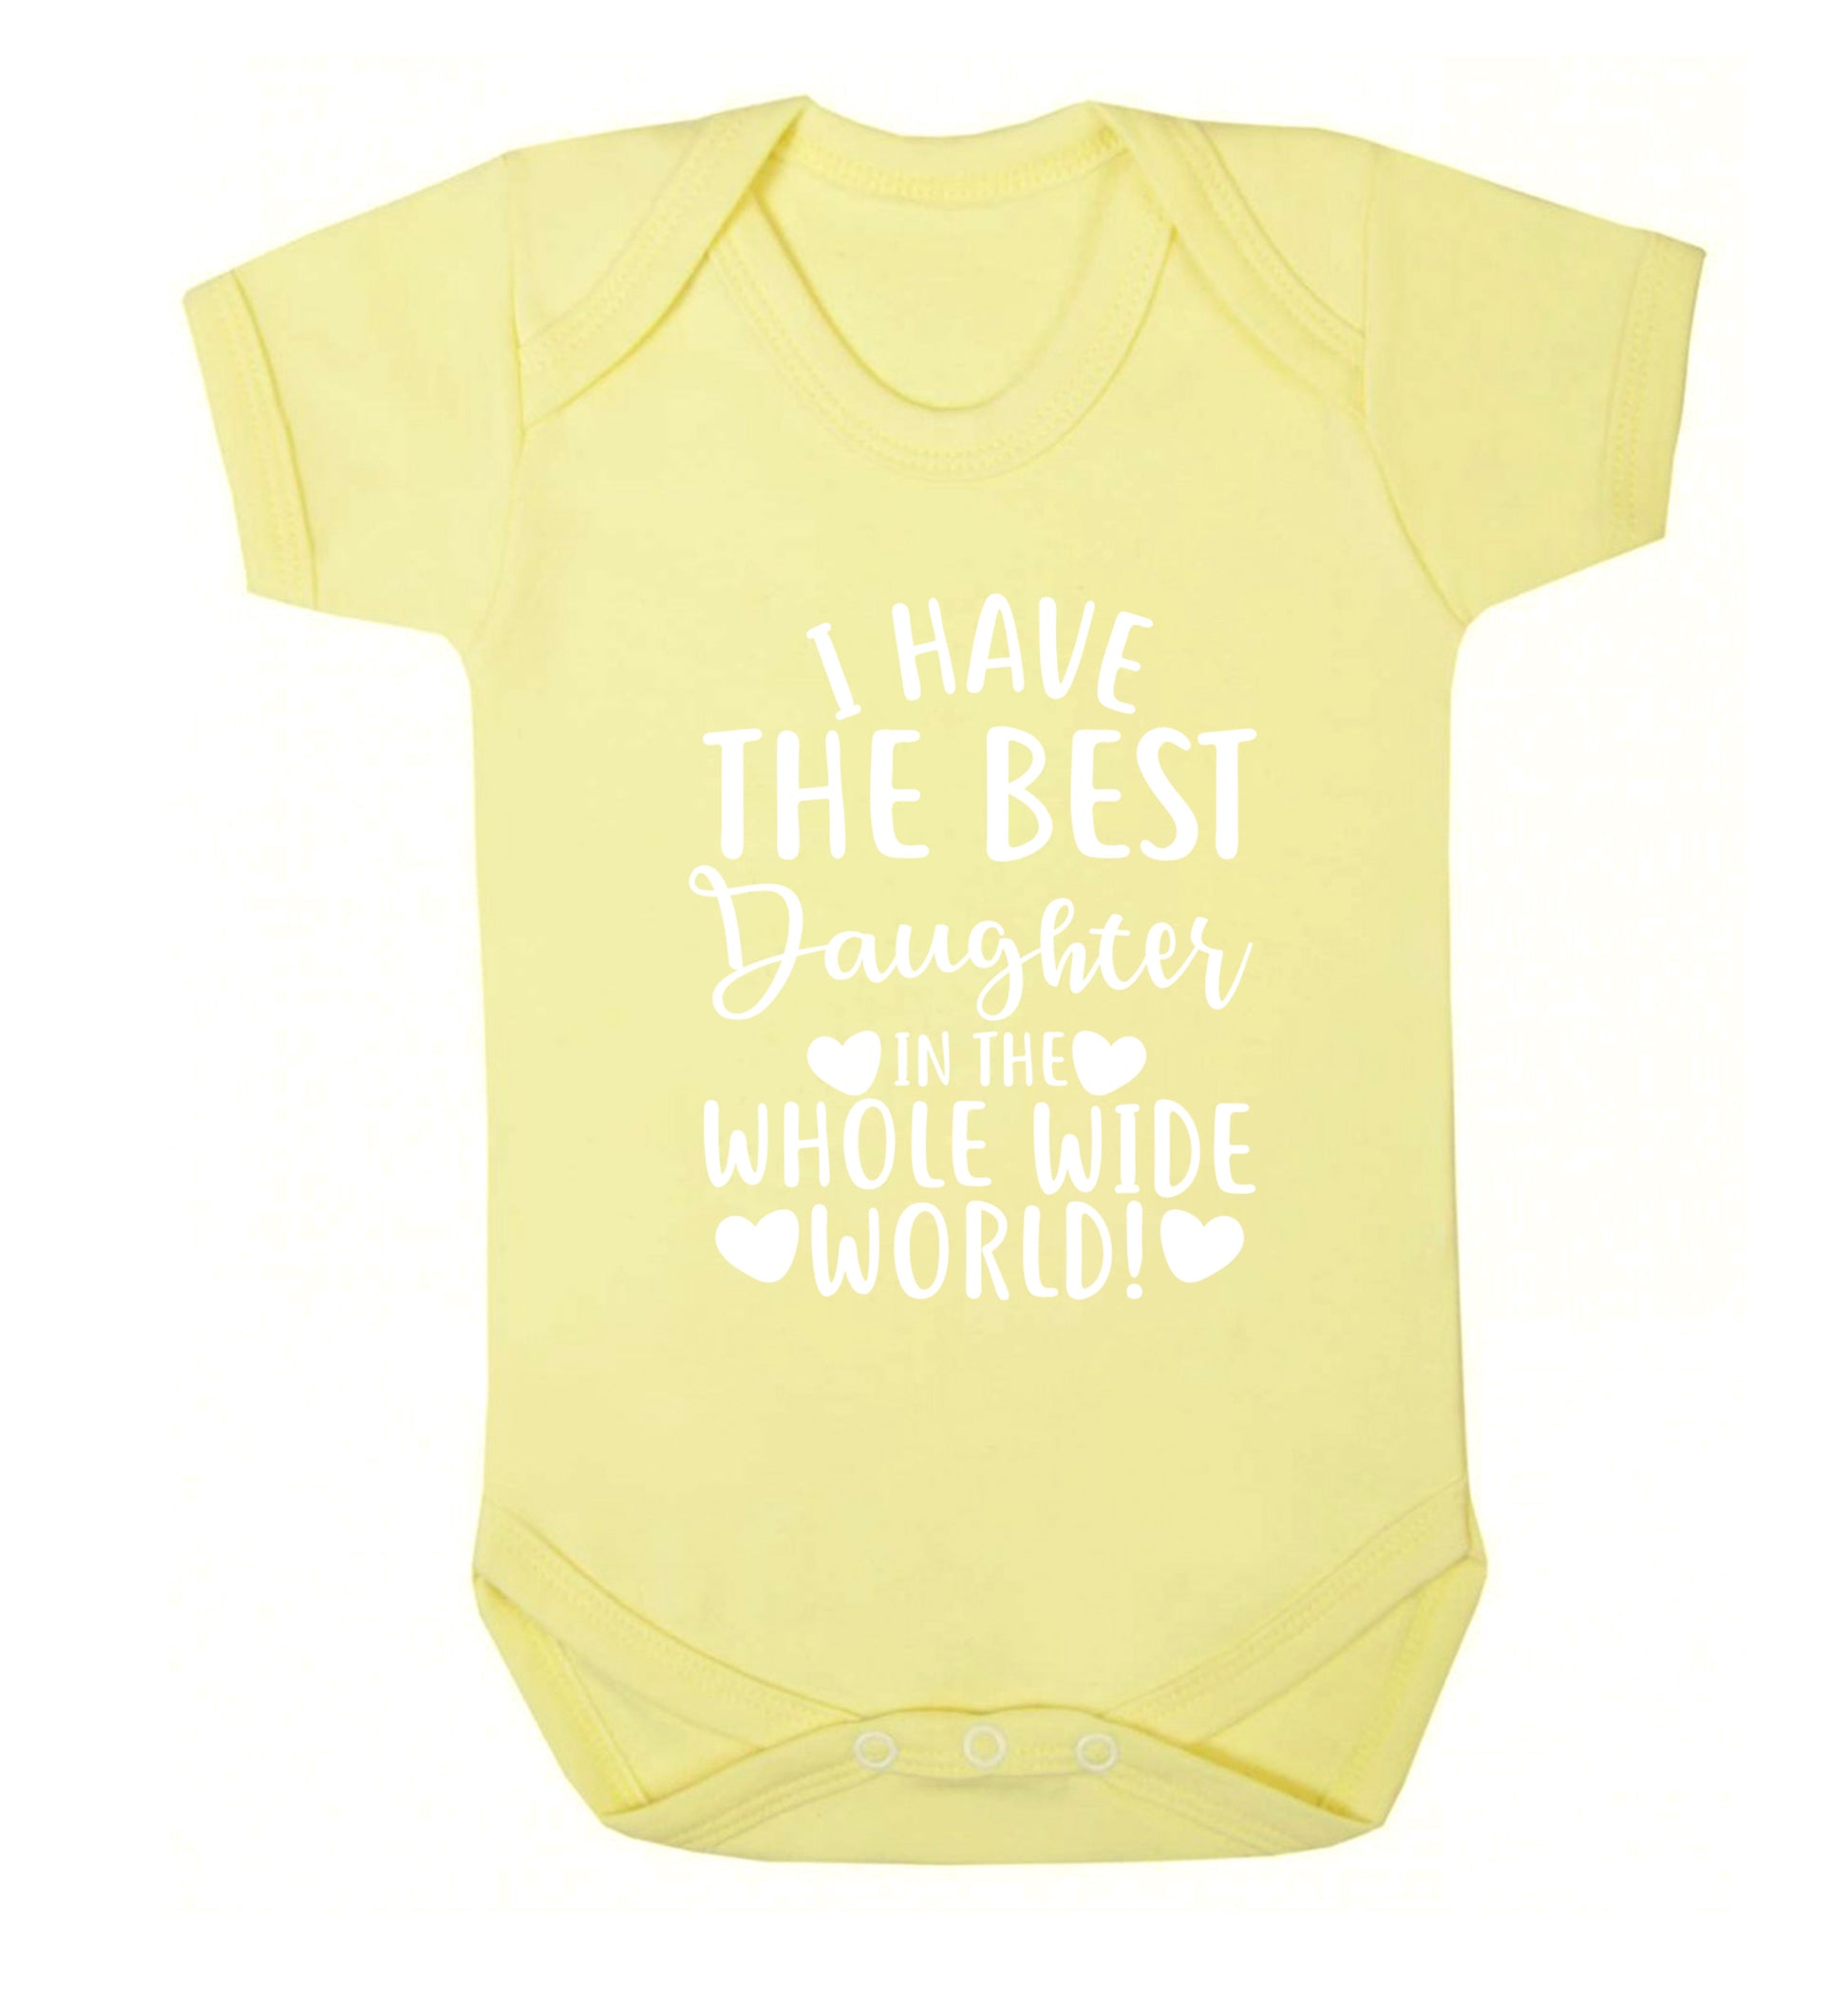 I have the best daughter in the whole wide world! Baby Vest pale yellow 18-24 months